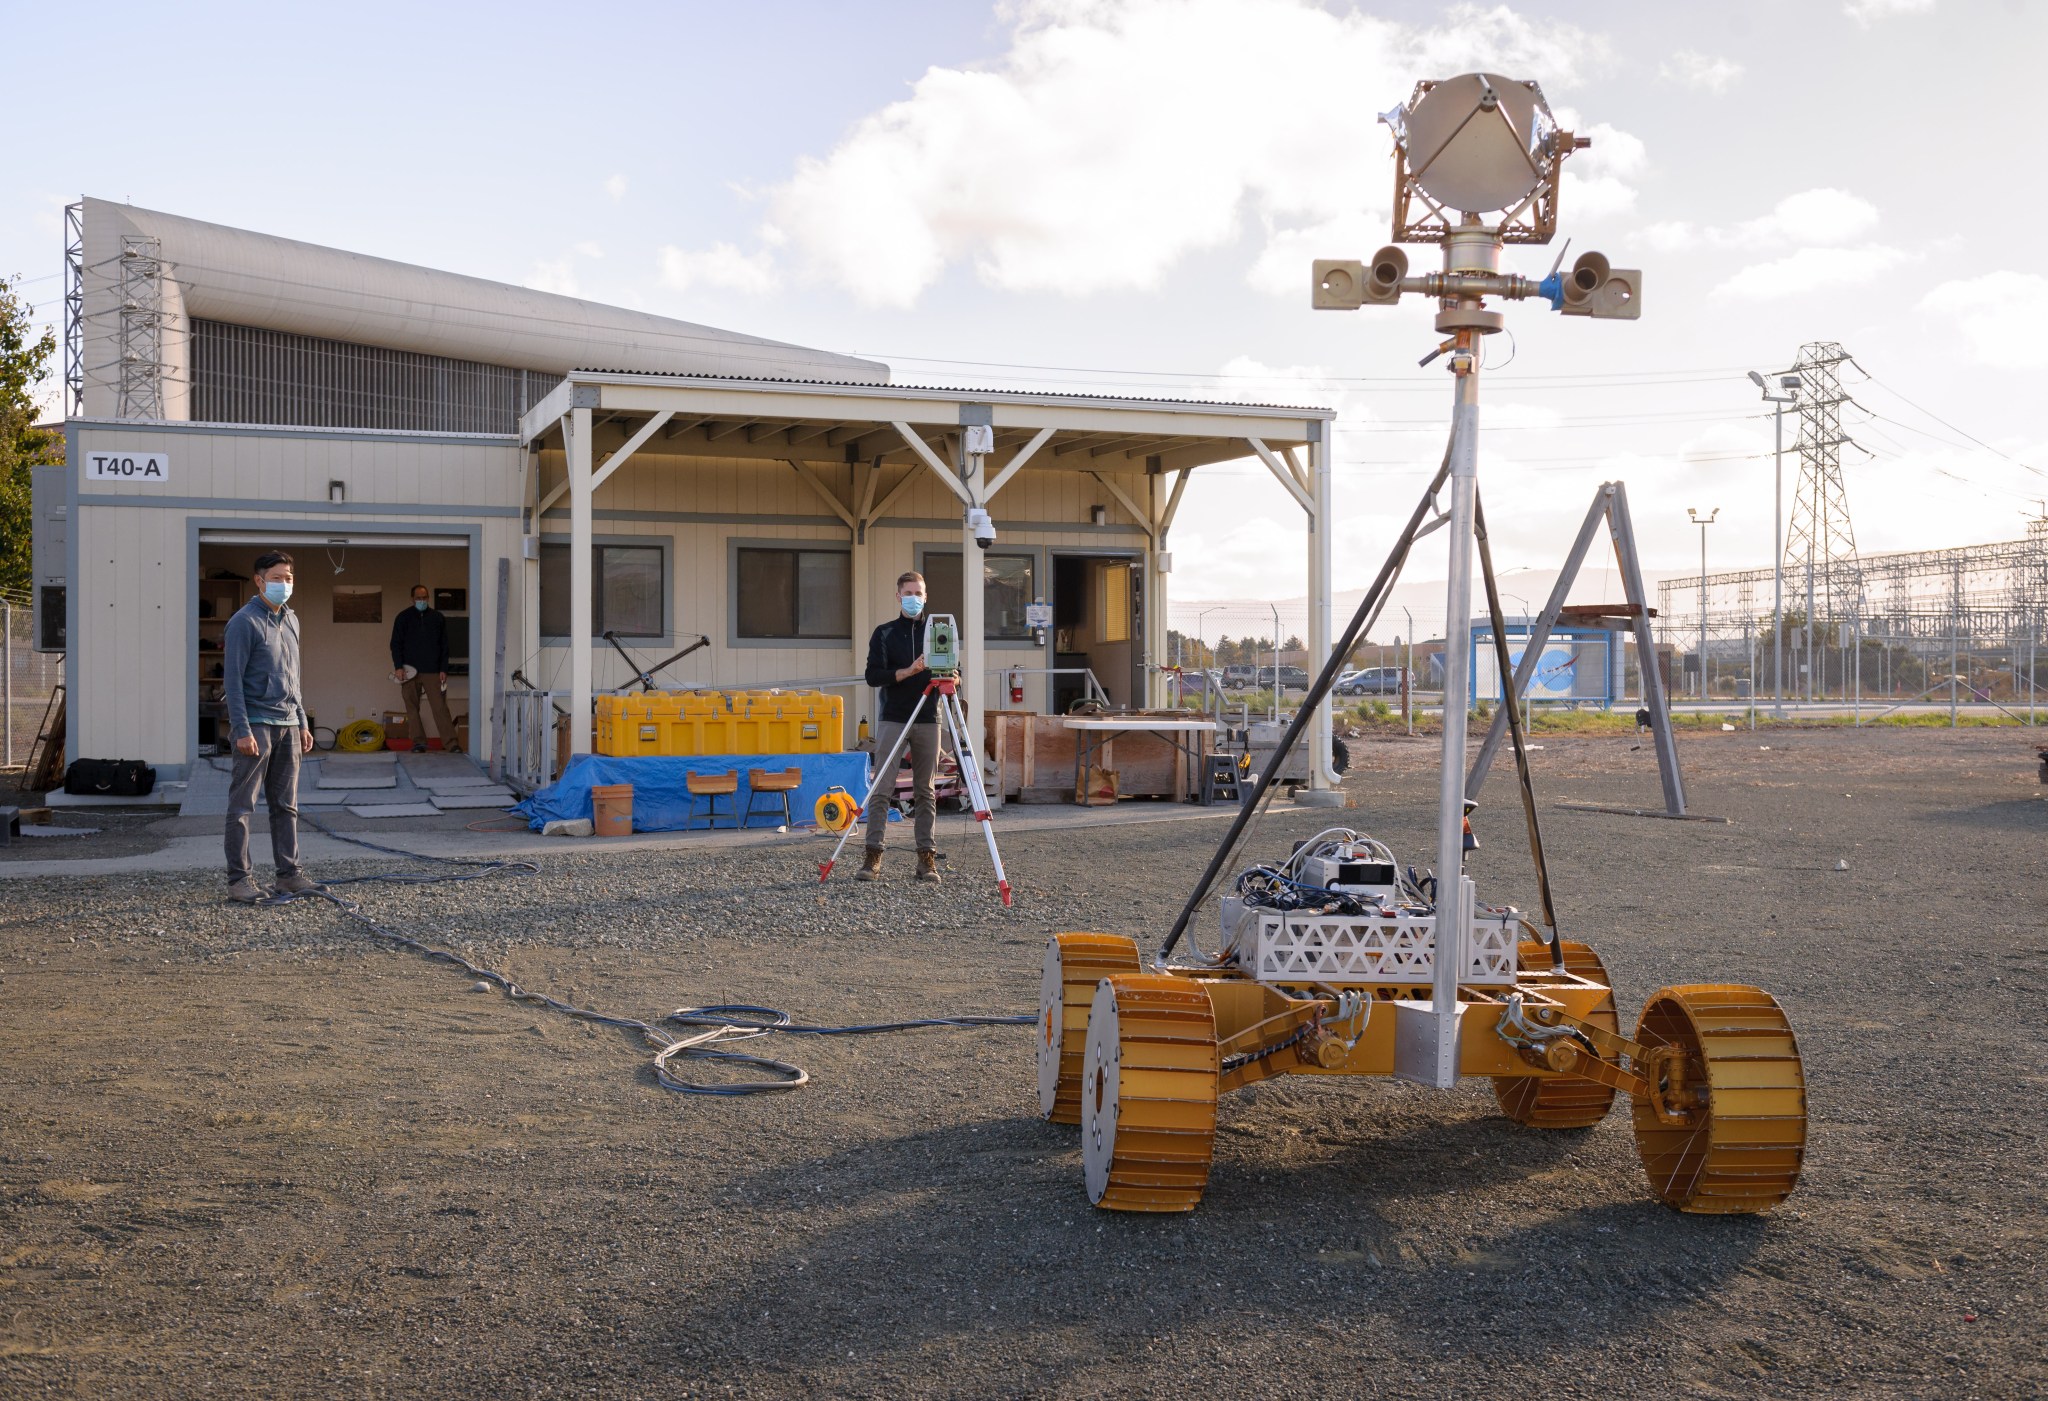 Engineers test a stripped-down, engineering prototype of NASA’s Volatiles Investigating Polar Exploration Rover, or VIPER